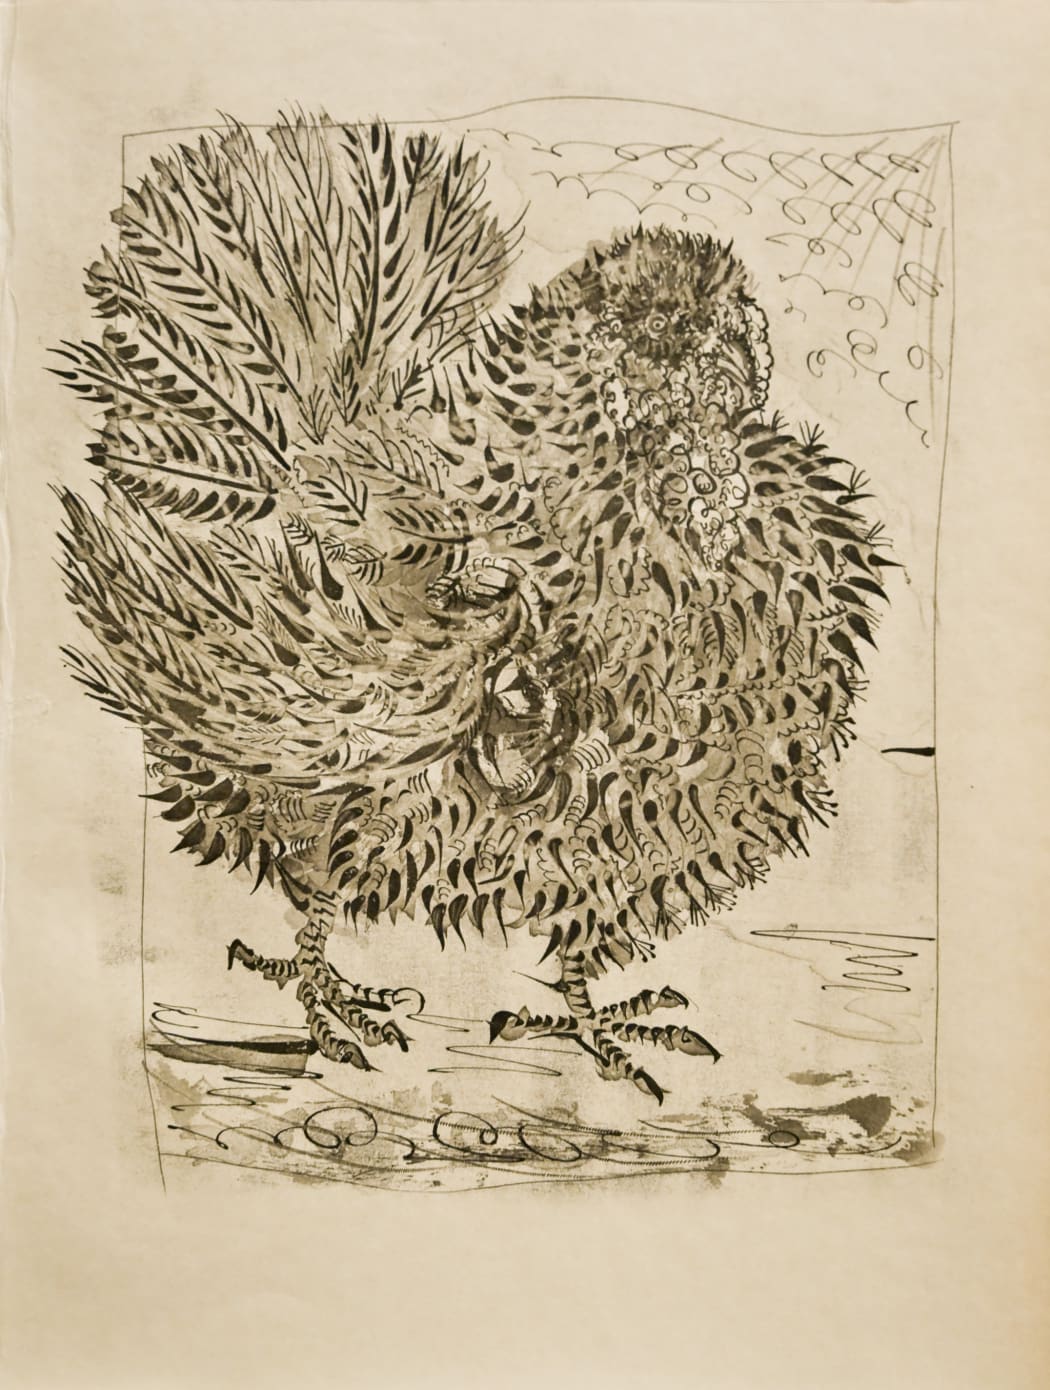 Le Dindon (The Turkey) B346, 1936, Sugarlift aquatint, drypoint, burin and scraper, 14 3/8 x 11 inches